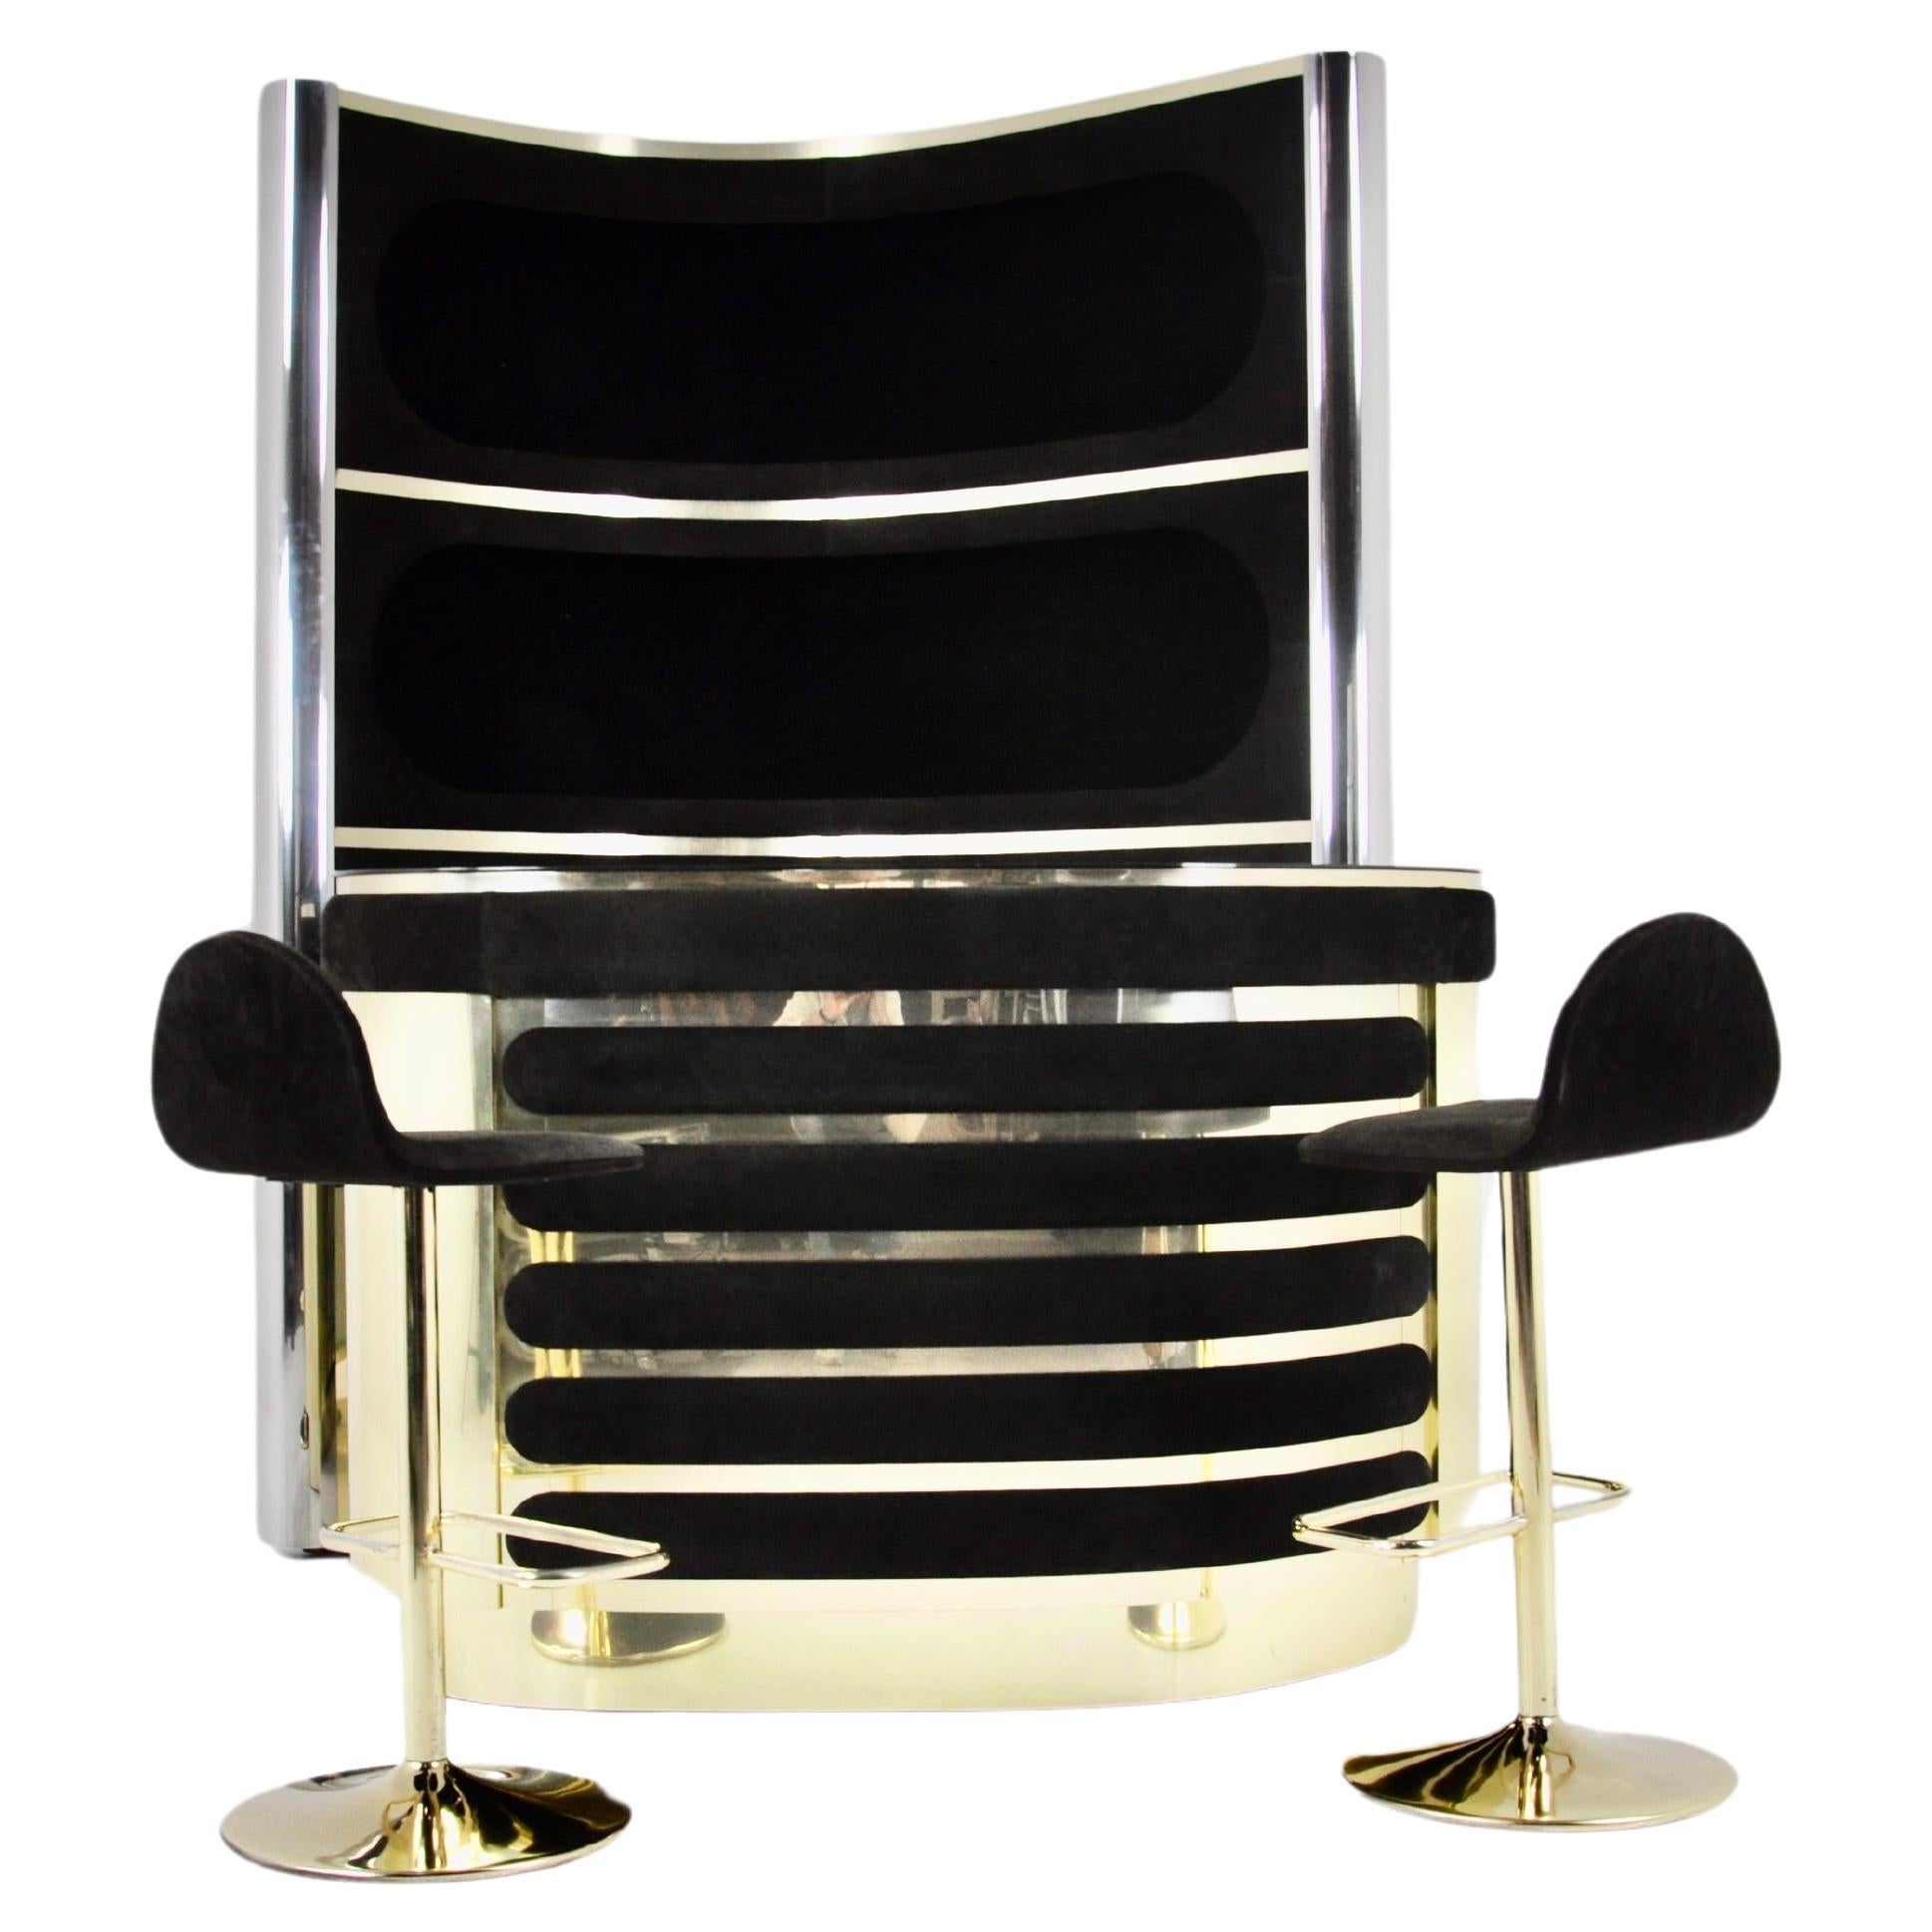 The set includes a cabinet with 3 illuminated shelves in black suede, chromed metal and brass, one of the sides at the back is mirrored glass.  It also includes a suede and brass countertop with a mirrored top, a refrigerator and a glass cabinet